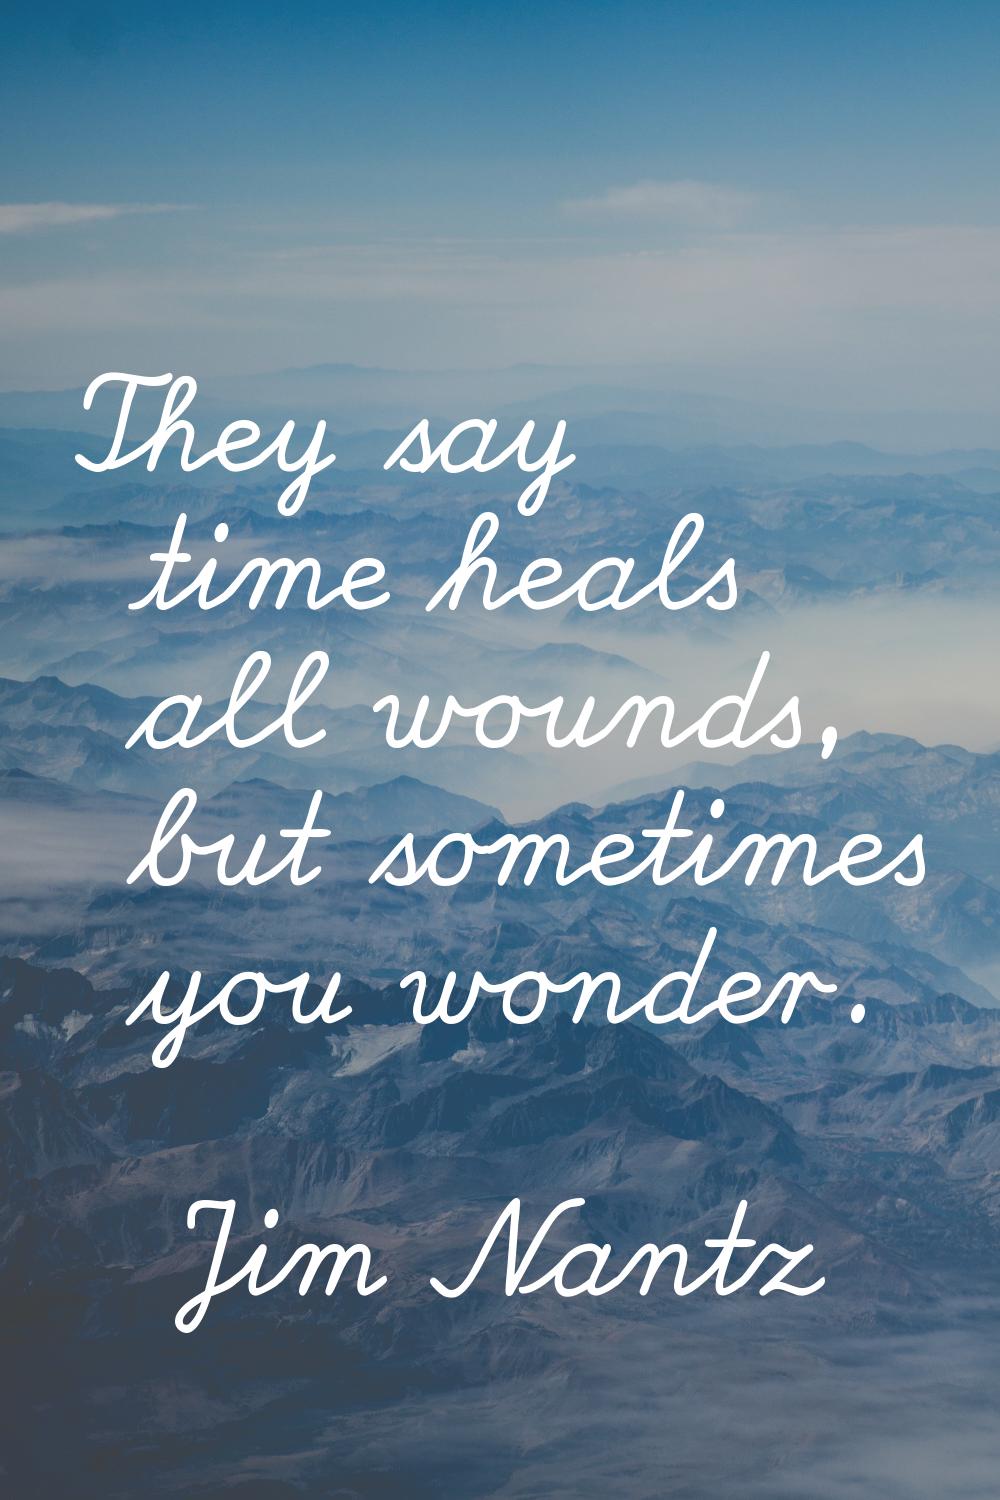 They say time heals all wounds, but sometimes you wonder.